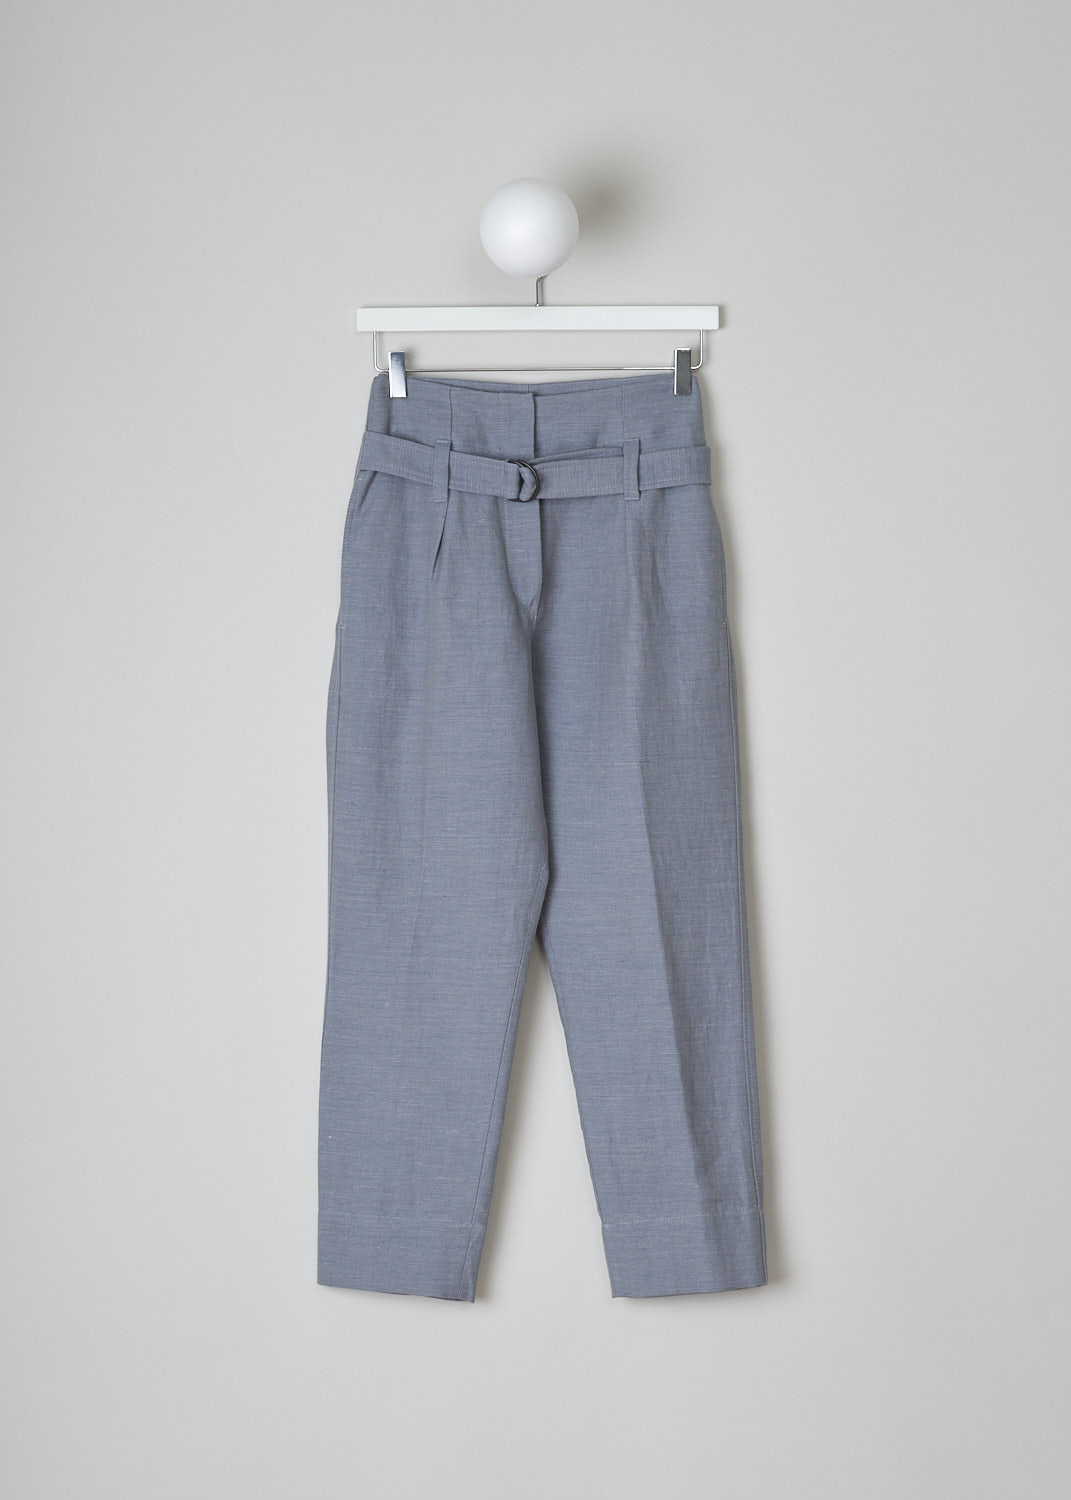 BRUNELLO CUCINELLI, HIGH-WAISTED BLUE HERRINGBONE PANTS, MF553P6596_C7148, Blue, Front, These high-waisted blue herringbone pants have a broad waistband with a fabric belt attached to it. The belt has a D-ring buckle. These pants have a concealed clasp and zip closure. In the front, these pants have slanted pockets. The tapered pants legs have a broad hem. In the back, these pants have welt pockets.

